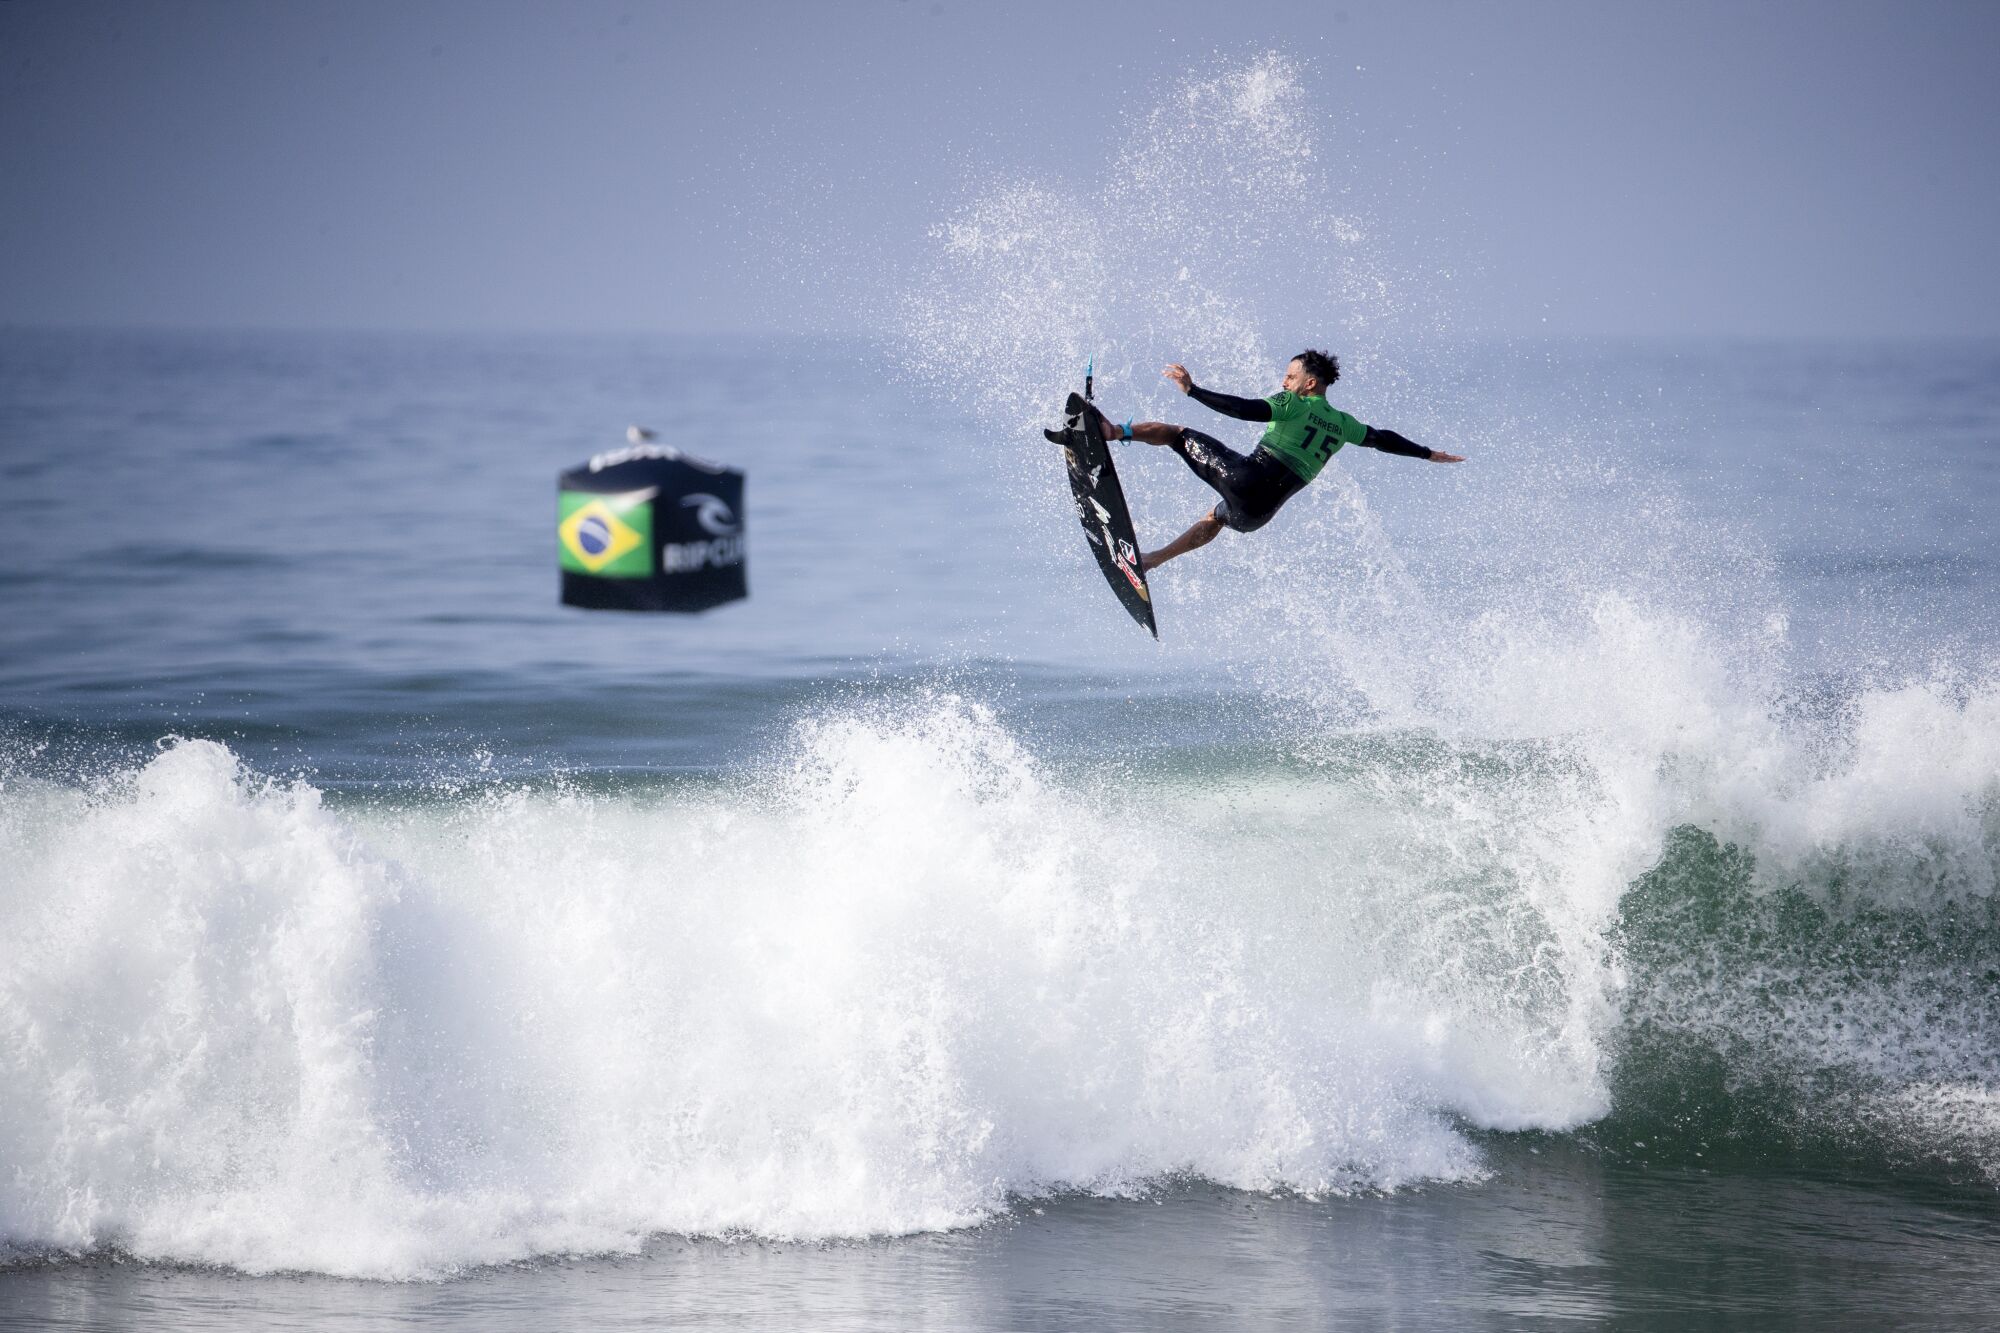 Italo Ferreira of Brazil gets some big air during his first match at the WSL Finals.